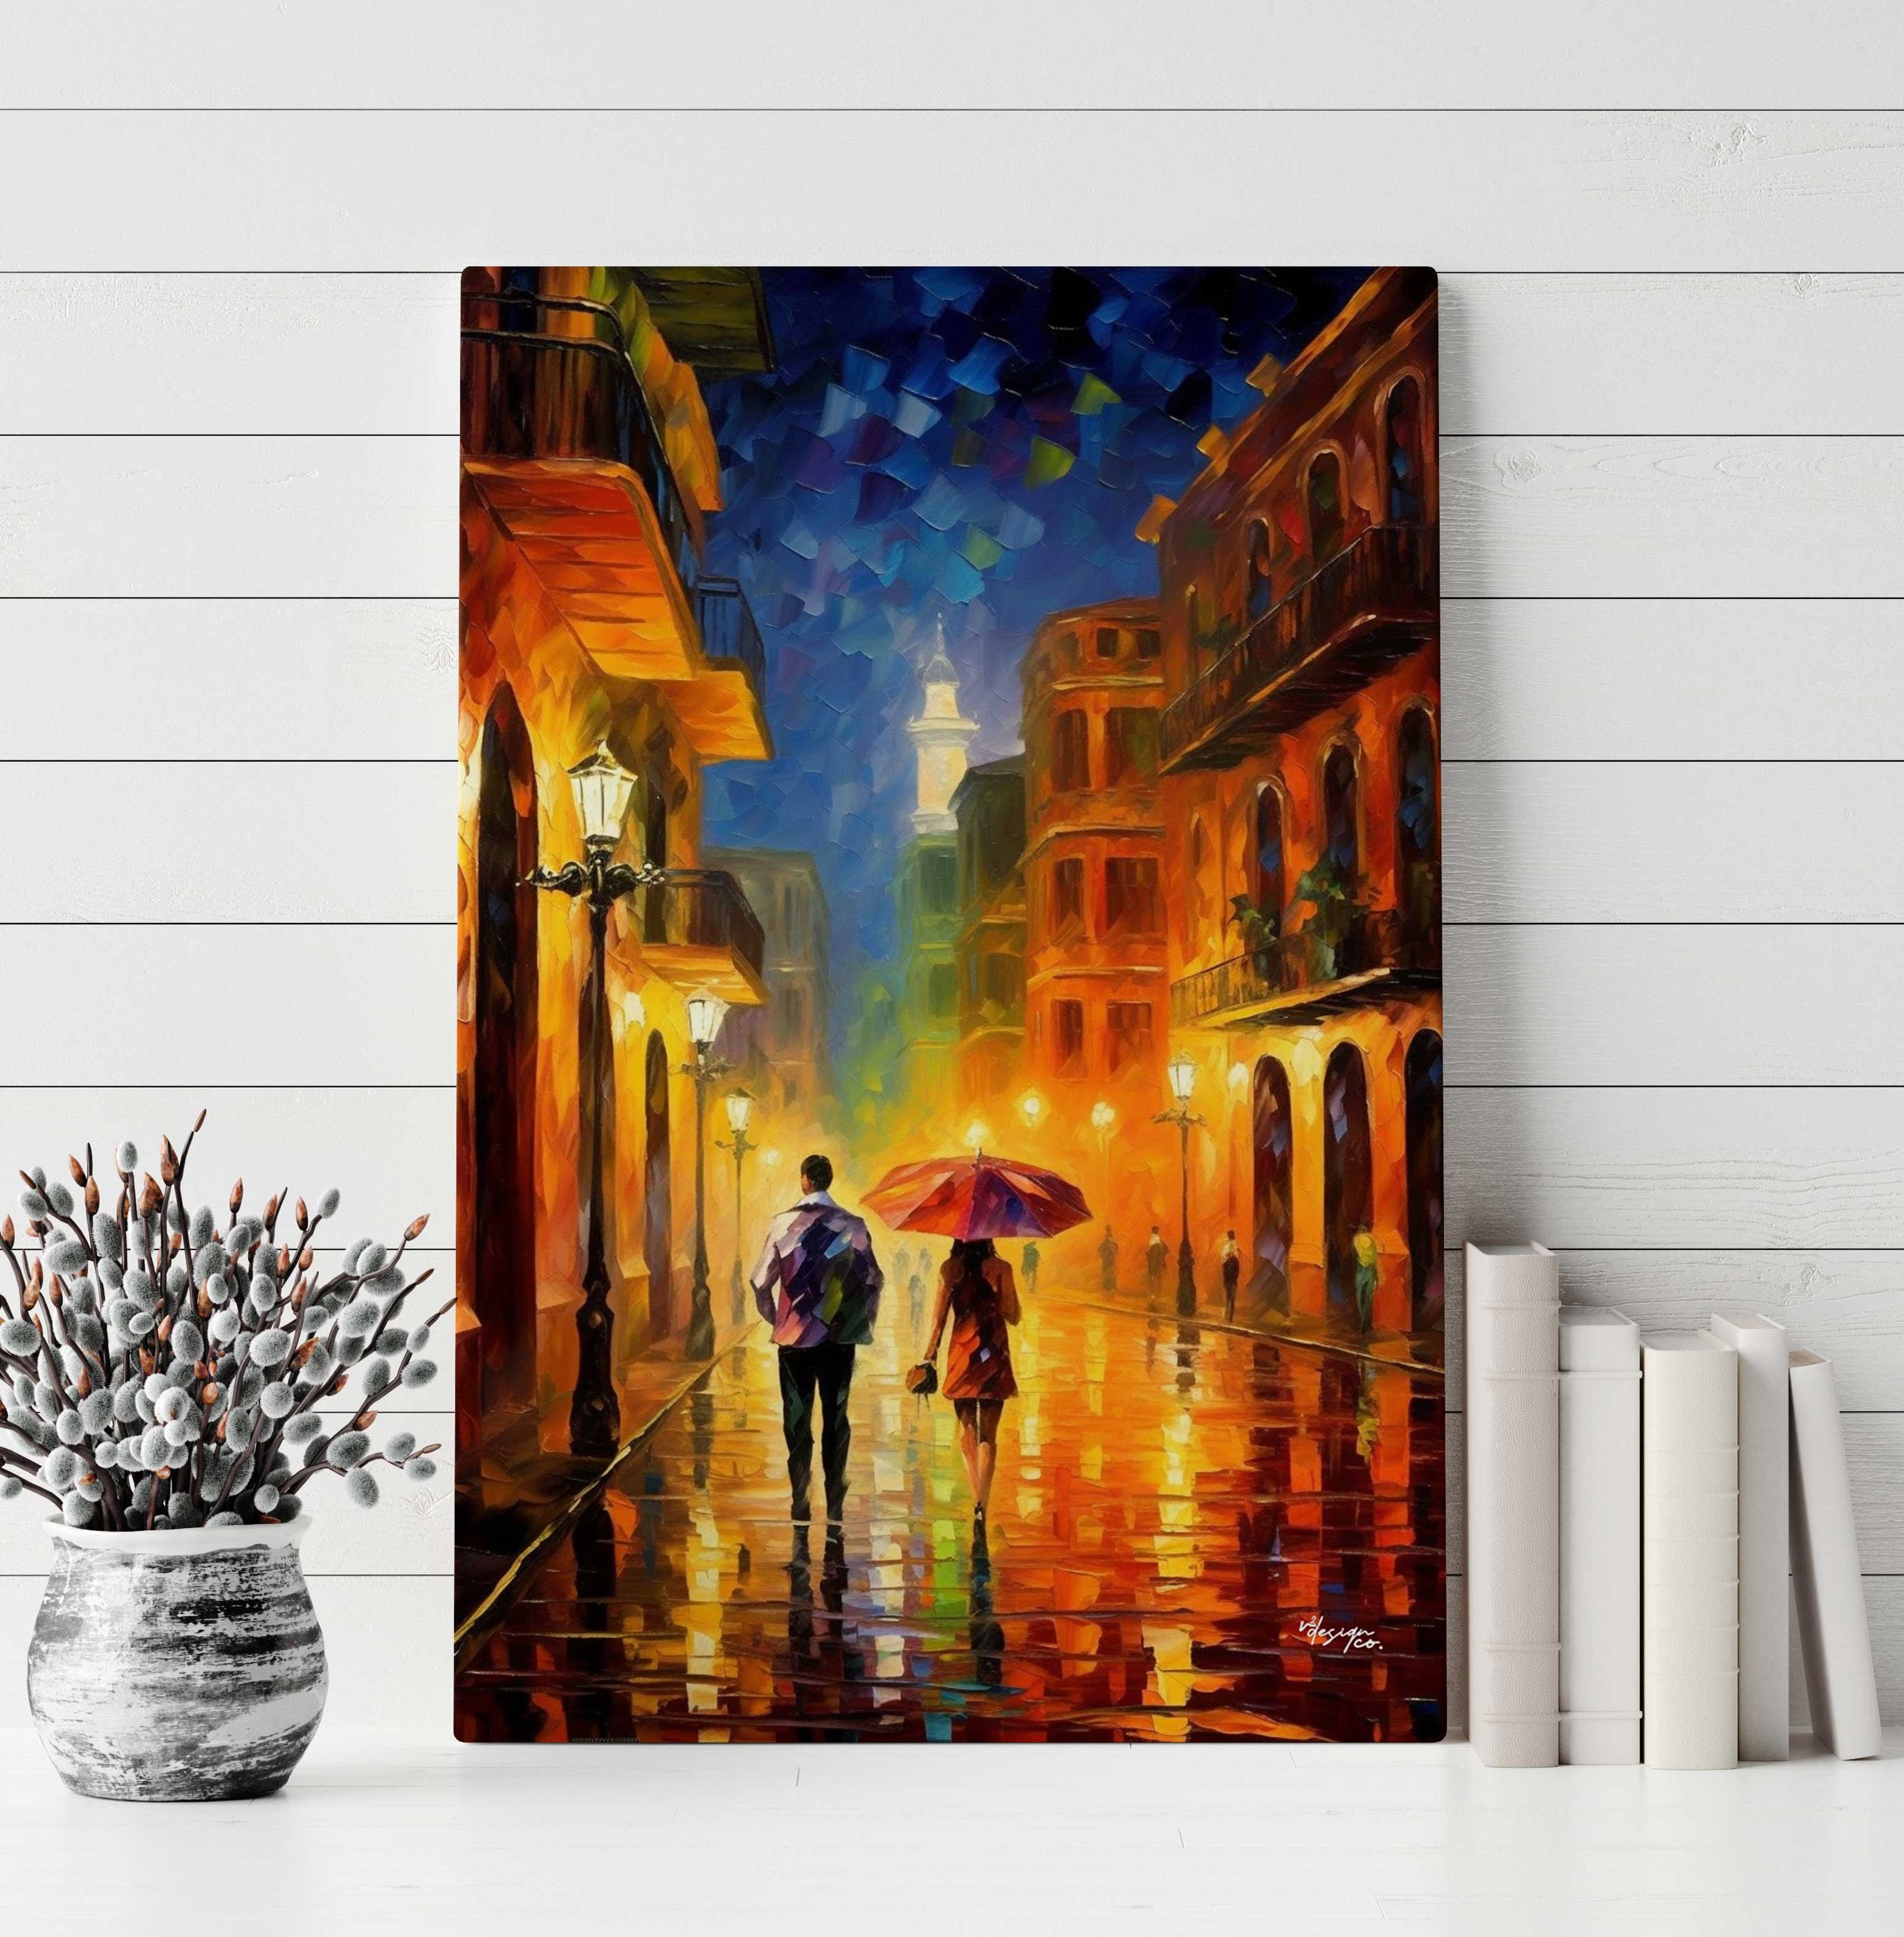 Contemporary Mixed Media Print on Canvas, Small Size, Featuring a Vibrant  City Scene for Office Wall Art, by Leonid Afremov Studio 